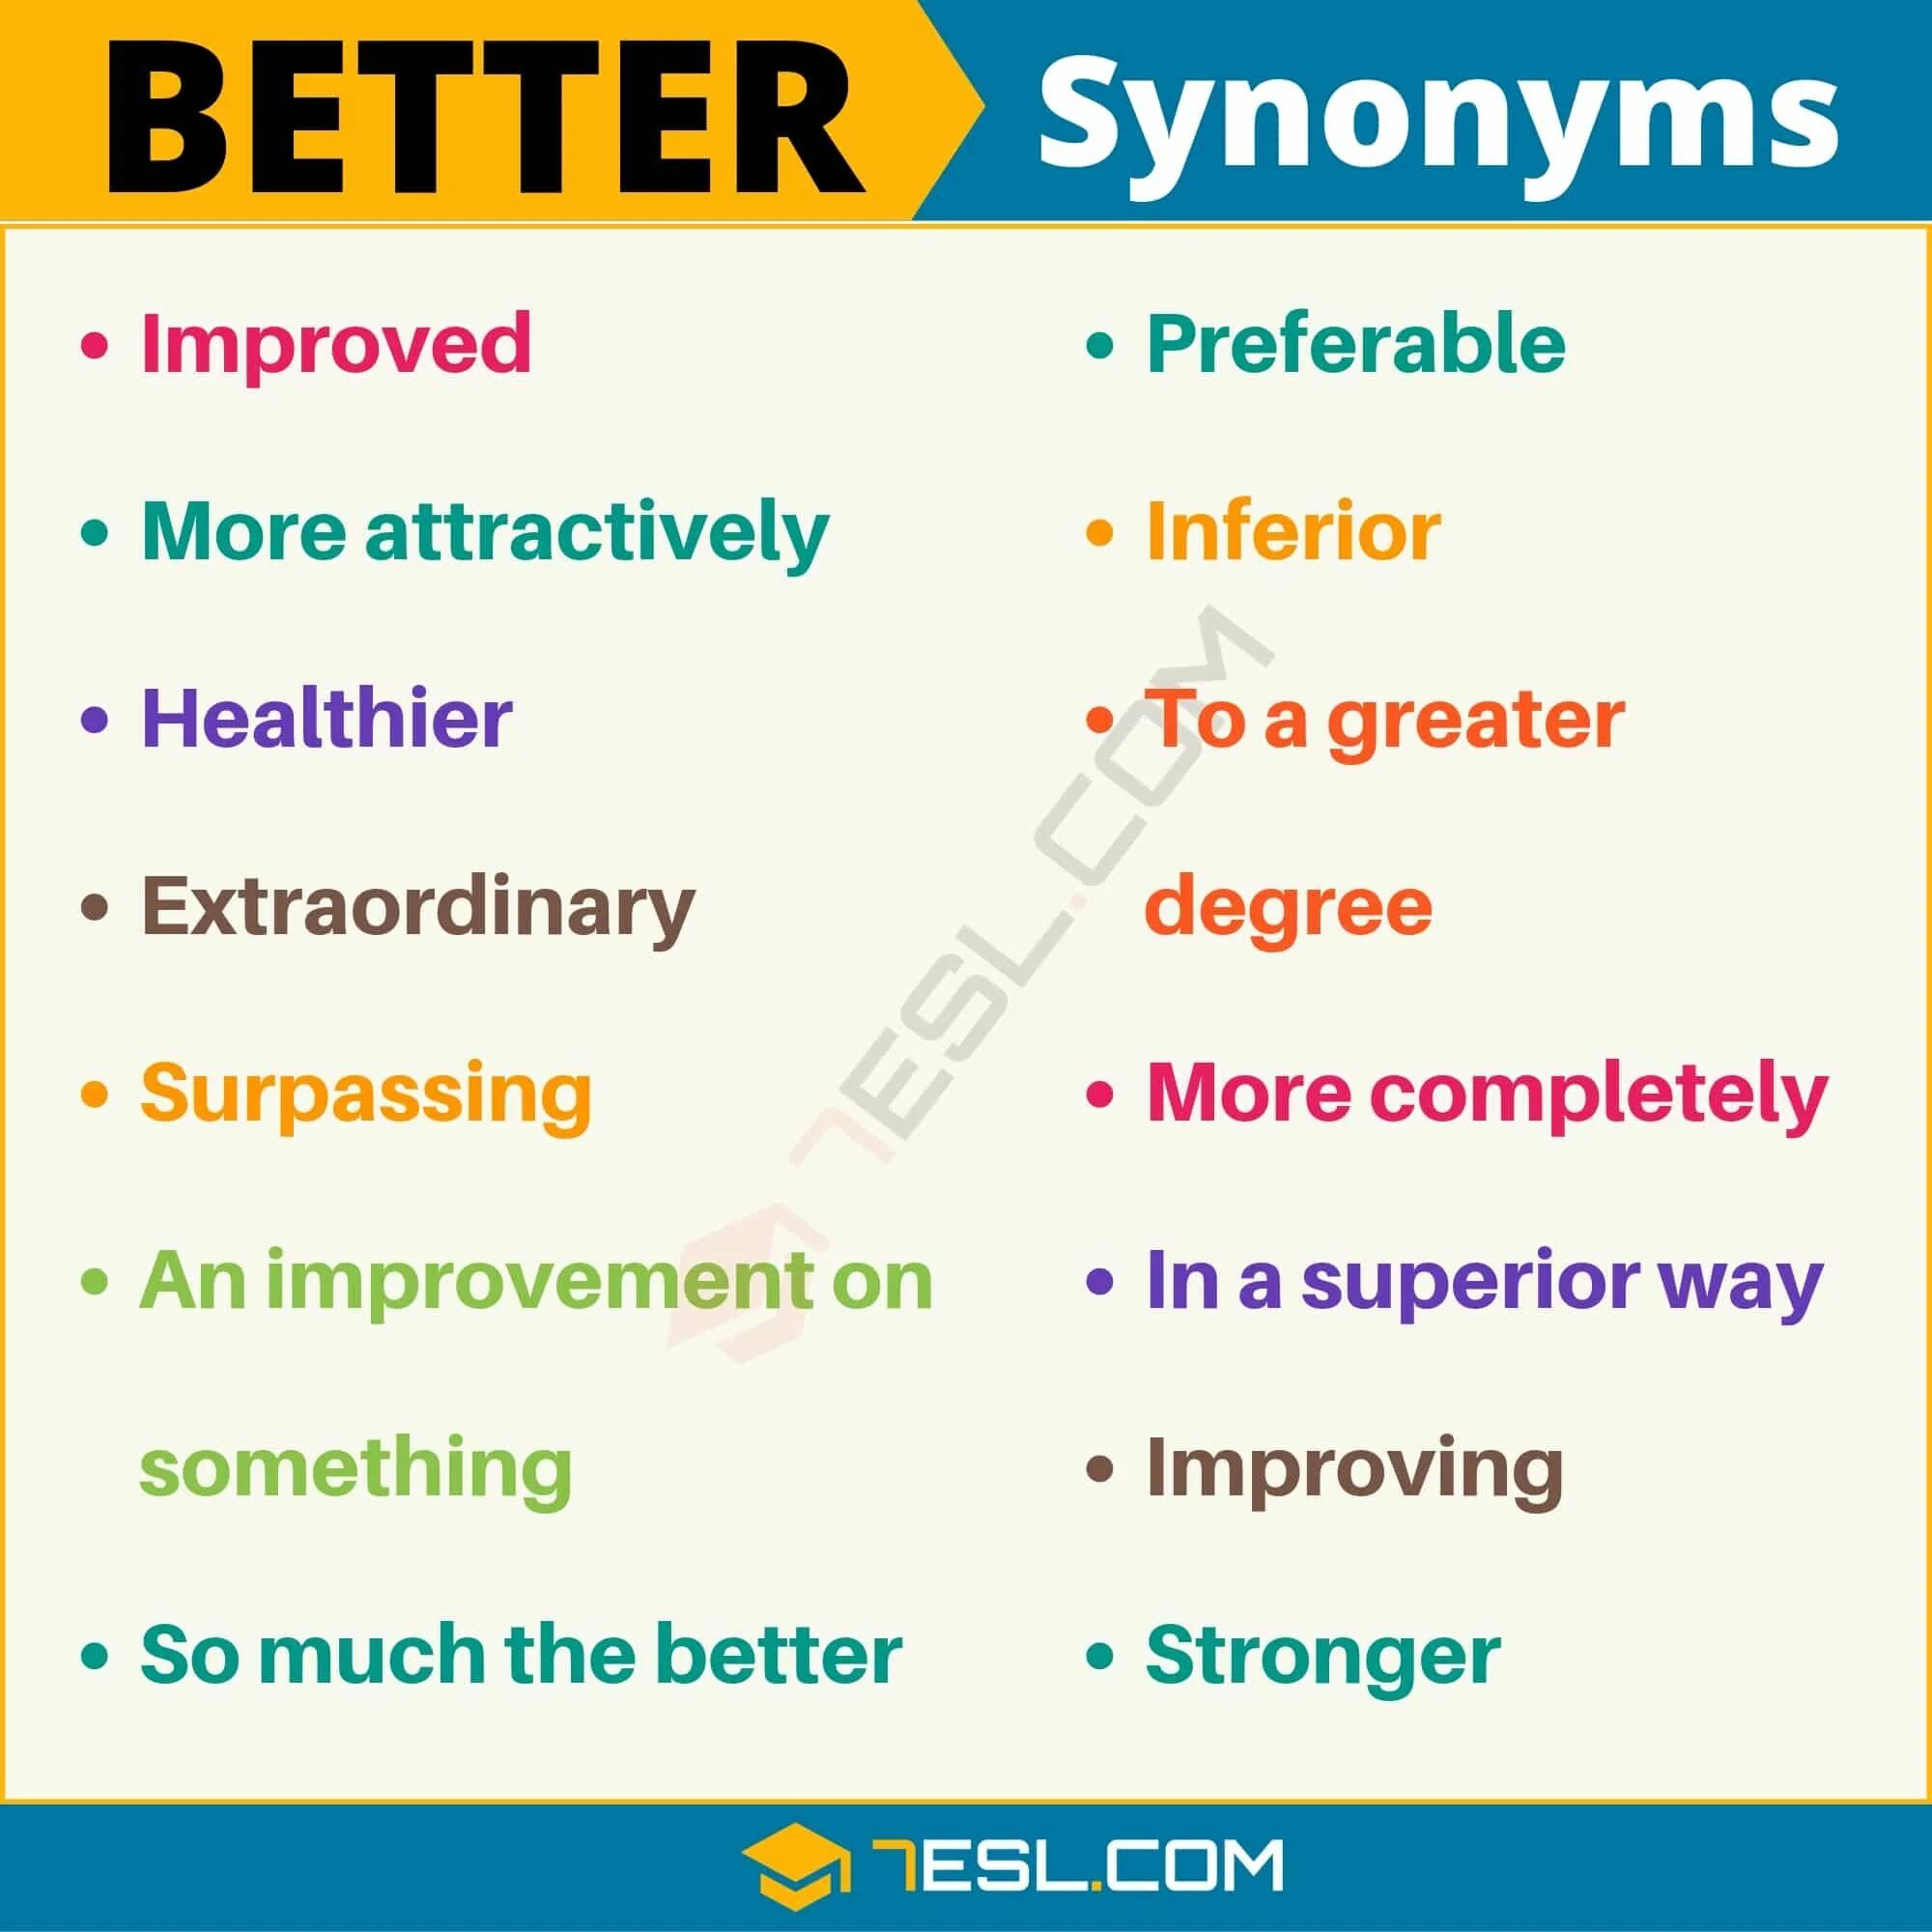 To improve something. Better synonyms. The best synonyms. Good synonyms. Better синонимы.